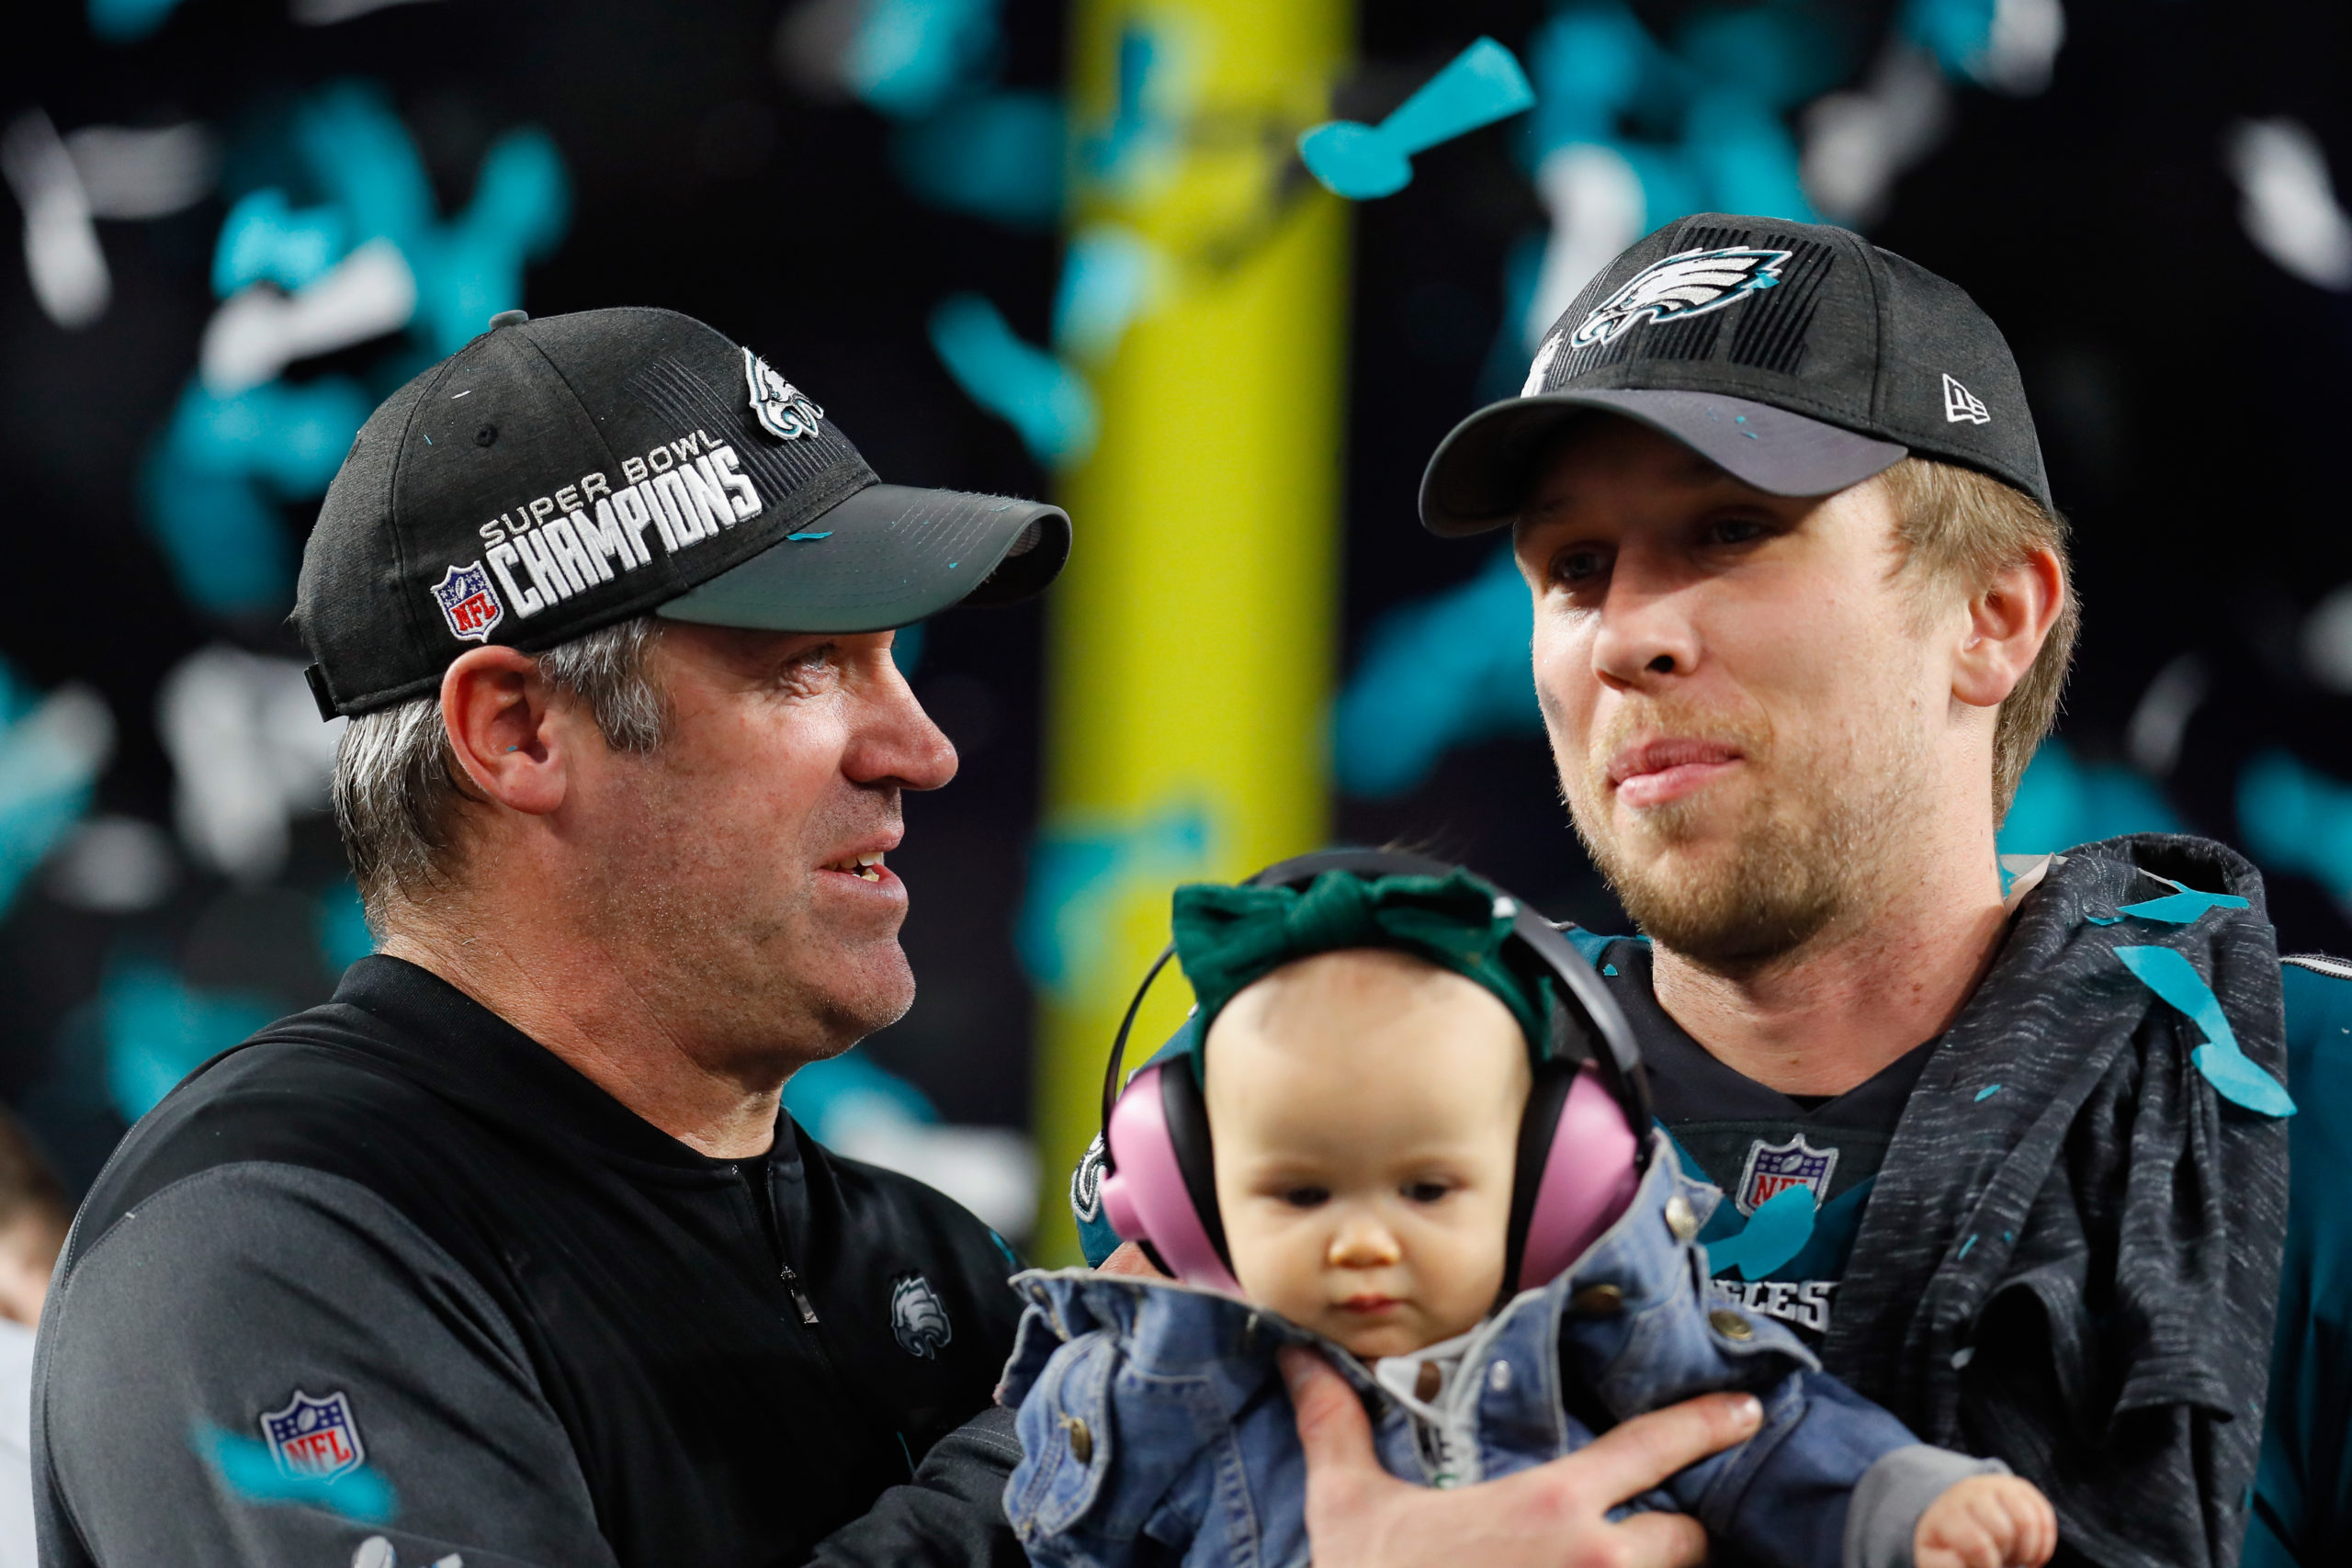 MINNEAPOLIS, MN - FEBRUARY 04: Nick Foles #9 of the Philadelphia Eagles celebrates with his daughter Lily Foles and his head coach Doug Pederson after his 41-33 victory over the New England Patriots in Super Bowl LII at U.S. Bank Stadium on February 4, 2018 in Minneapolis, Minnesota. The Philadelphia Eagles defeated the New England Patriots 41-33. Kevin C. Cox/Getty Images